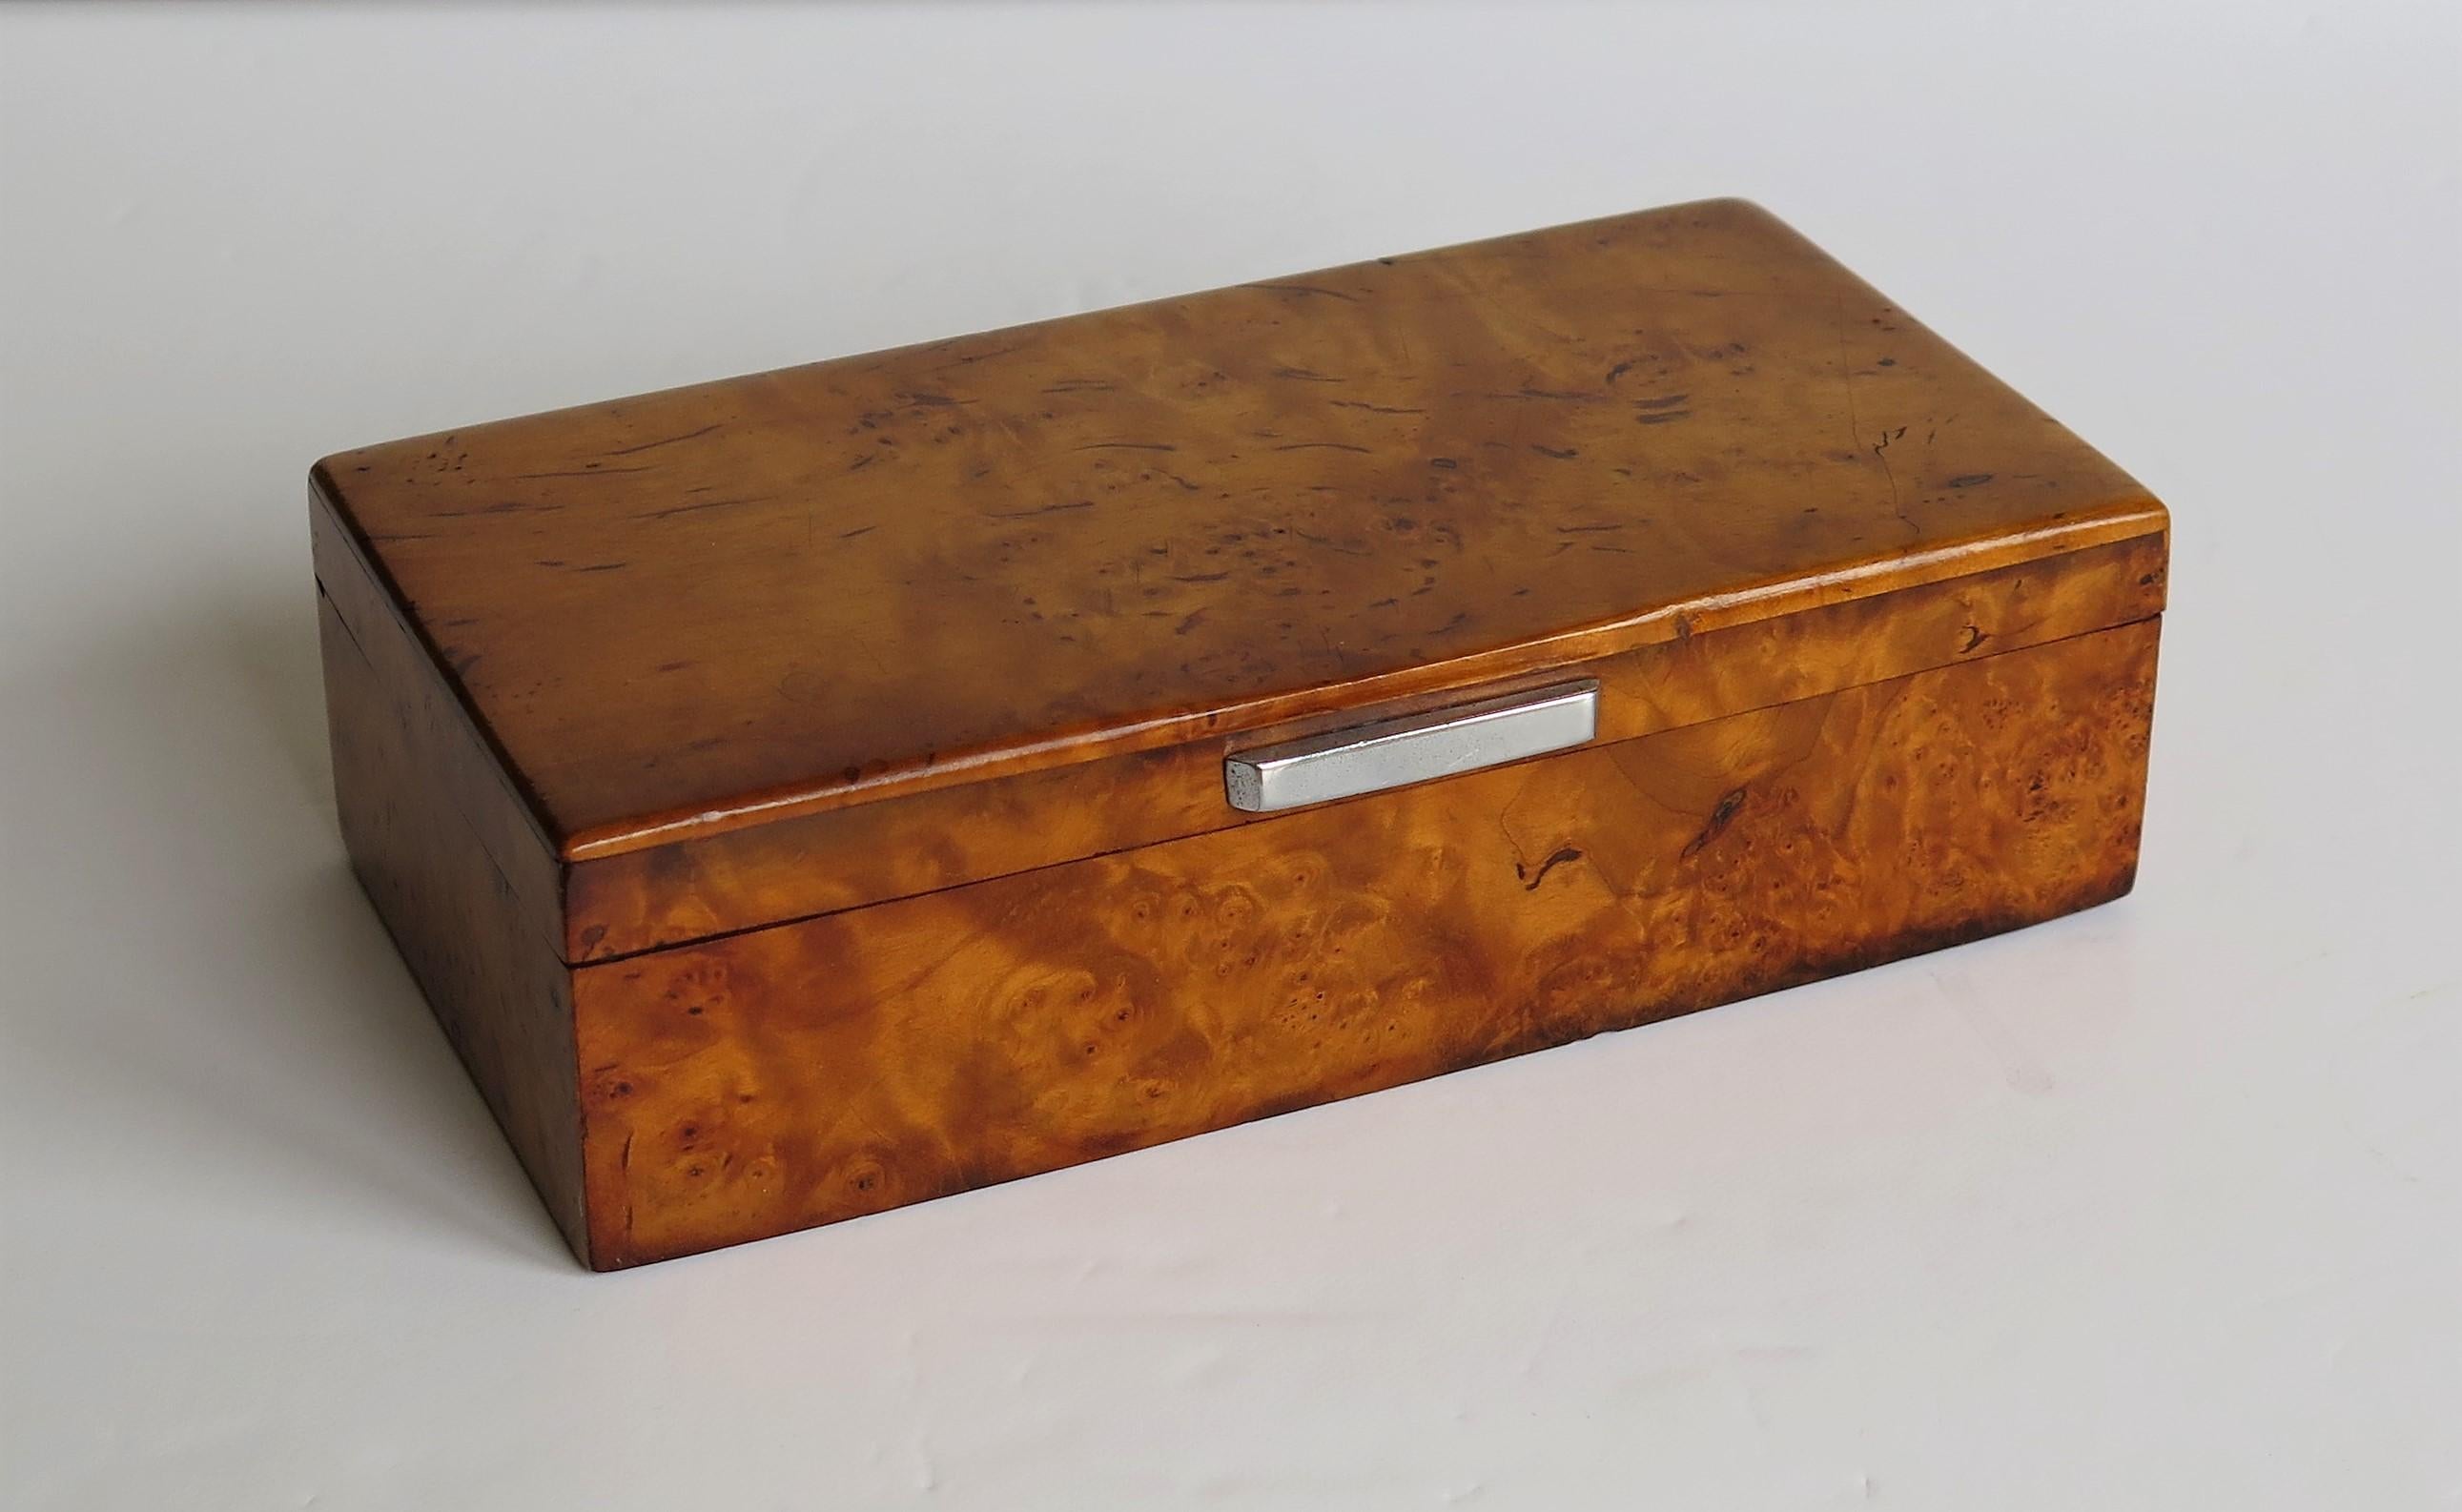 Hand-Crafted Art Deco Lidded Box of Bird's-Eye Maple with Chrome Handle, French circa 1925